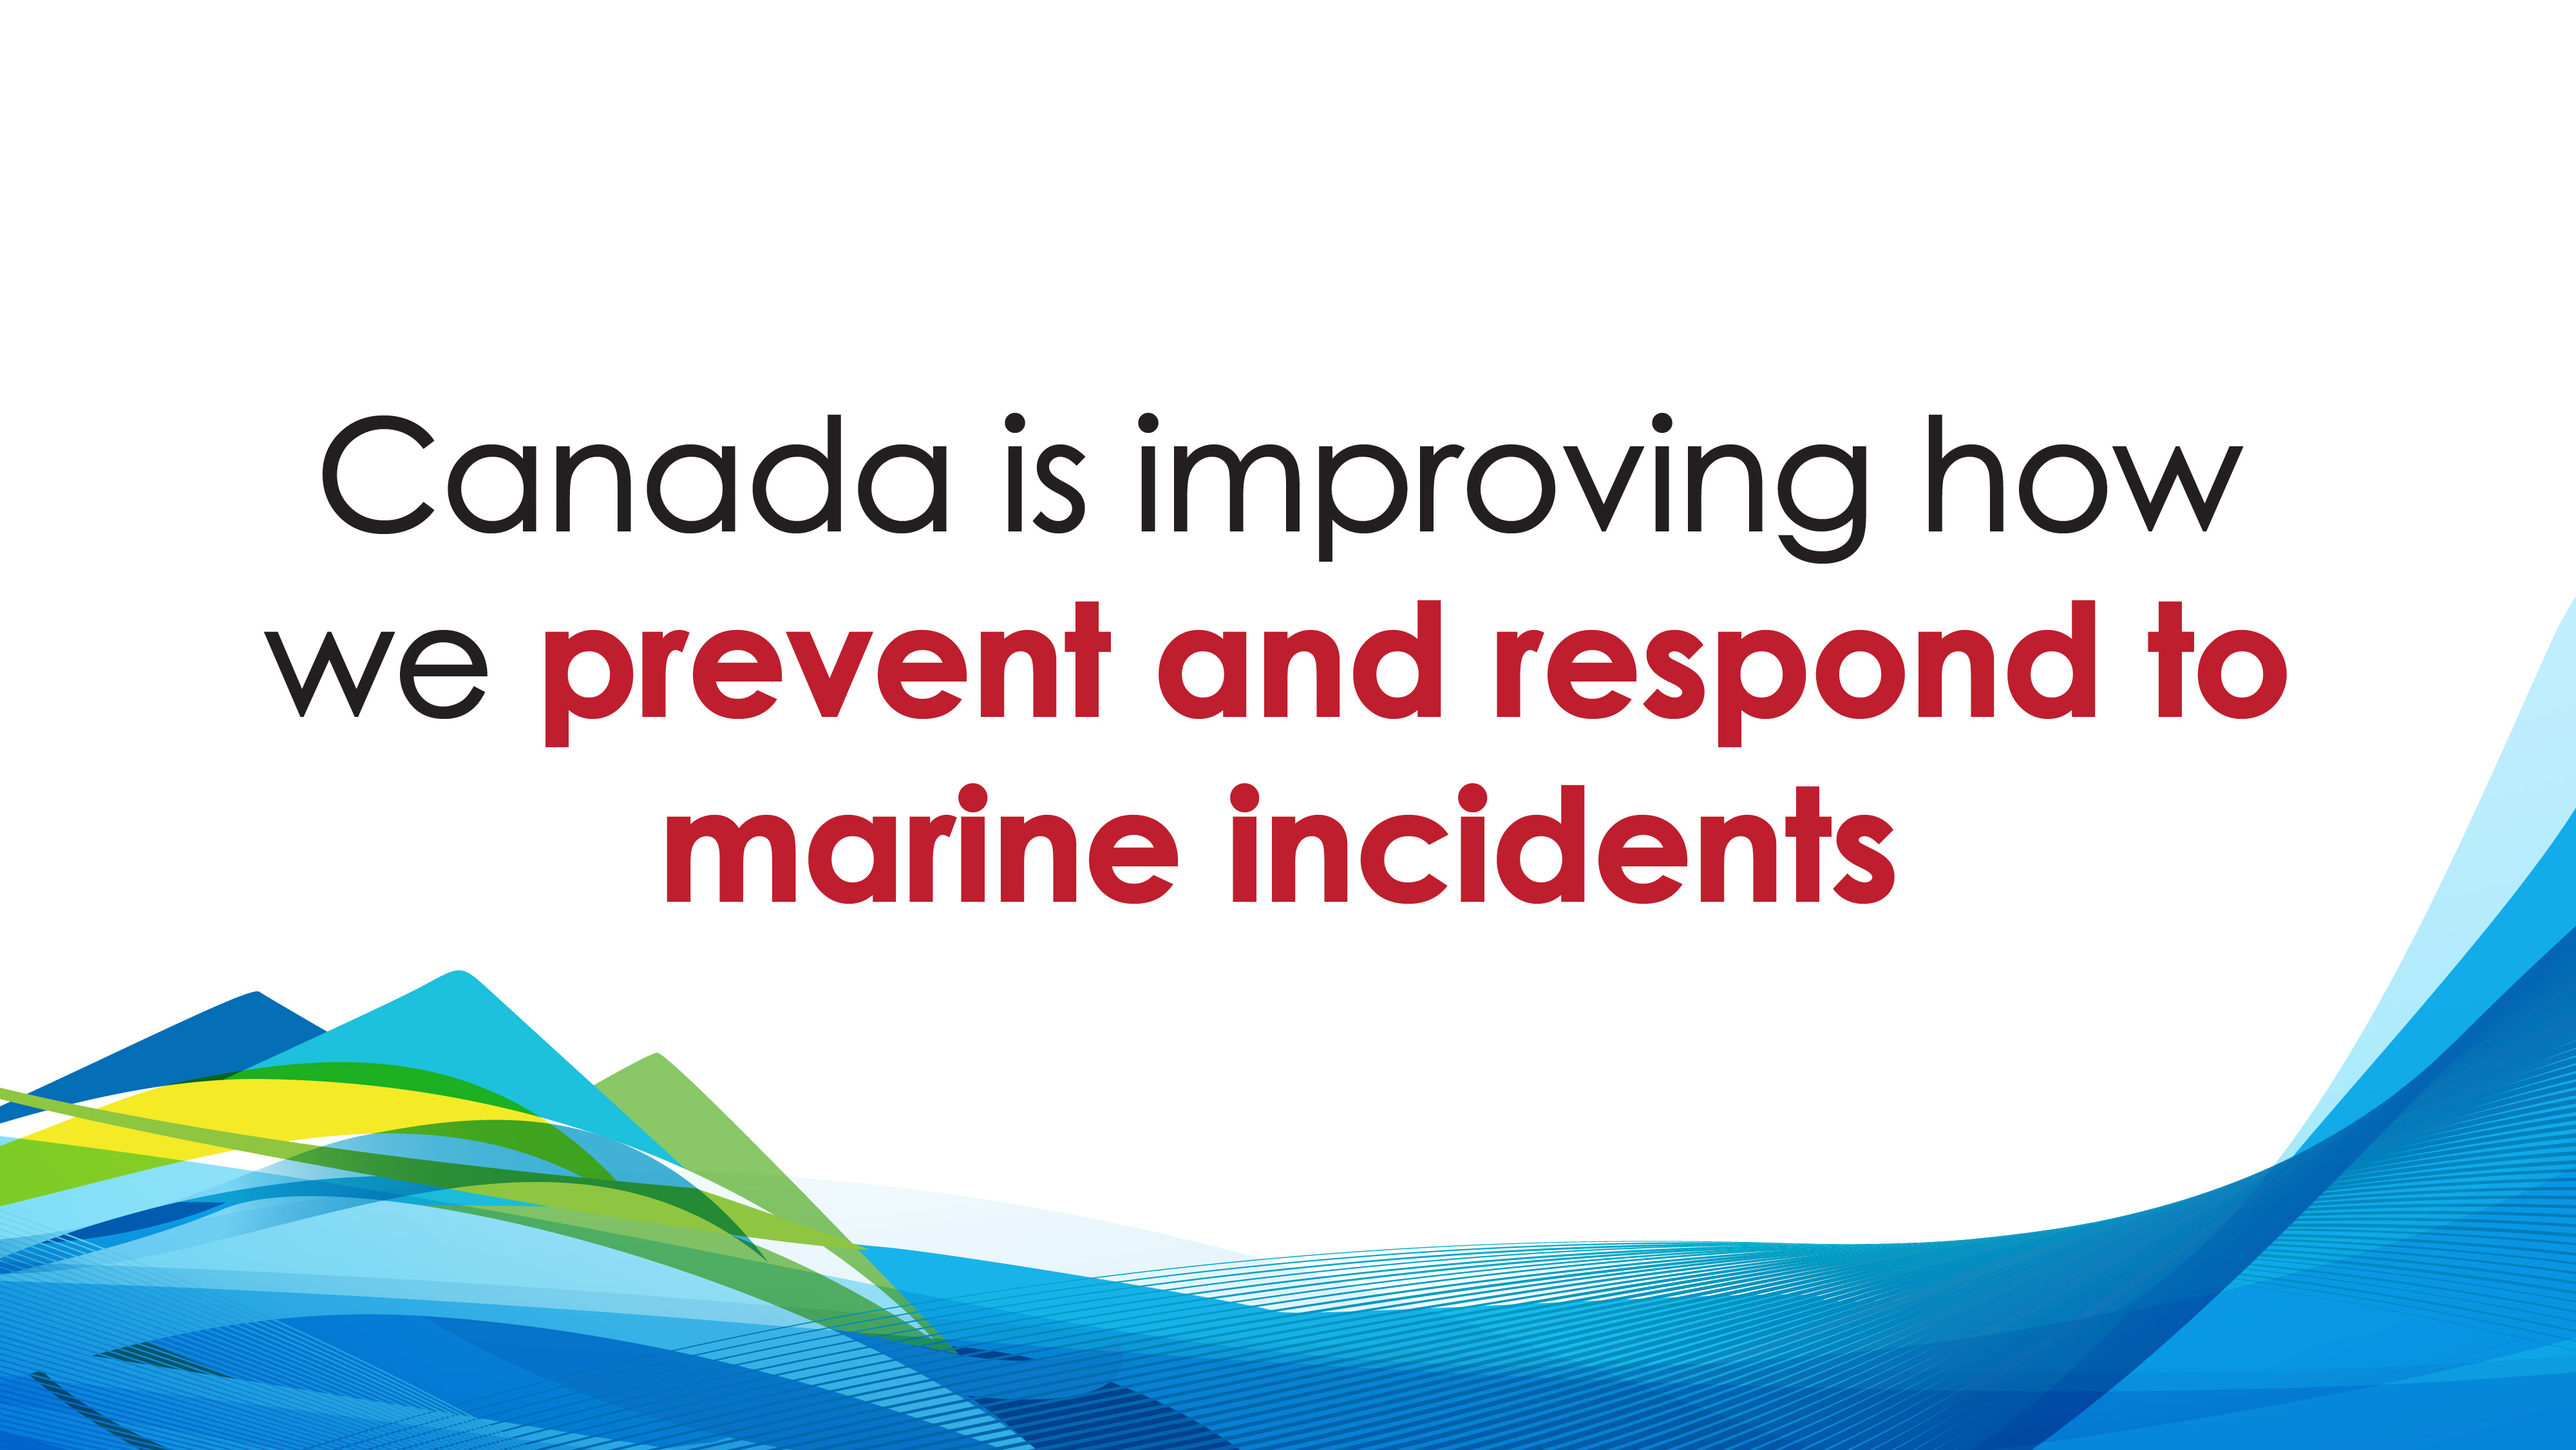 Canada is improving how we prevent and respond to marine incidents